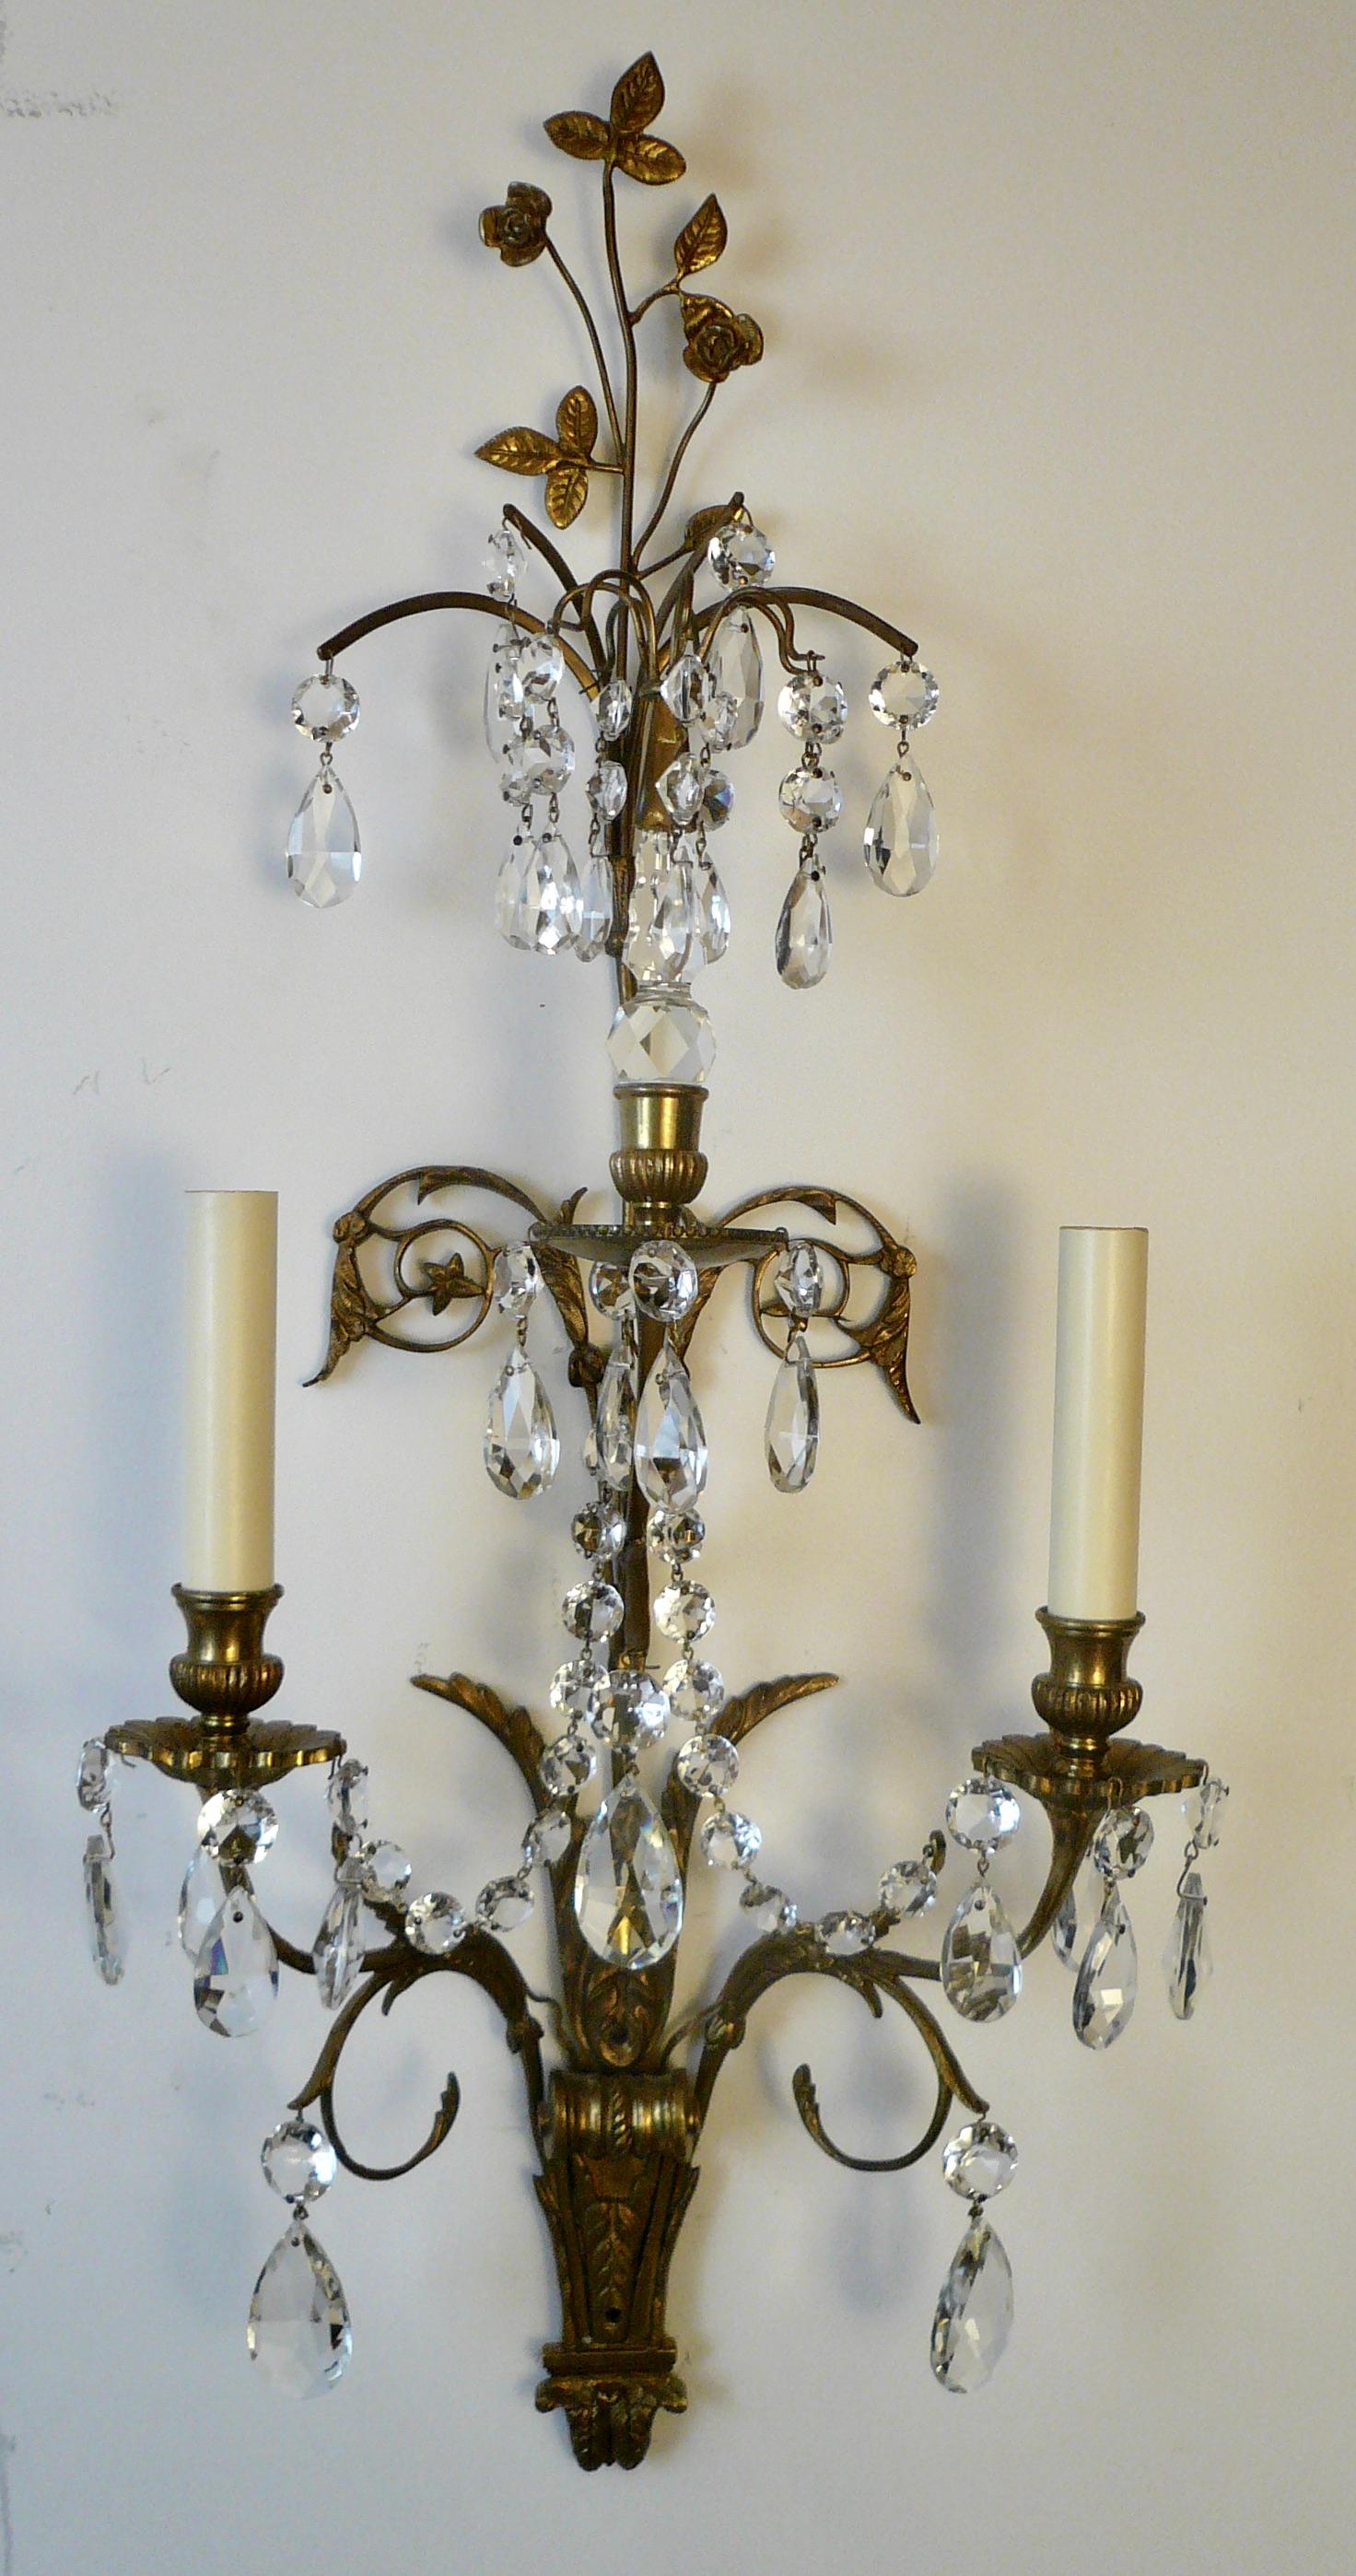 This handsome set of for sconces feature Classical motifs including acanthus leaves and almond shaped crystal drops.